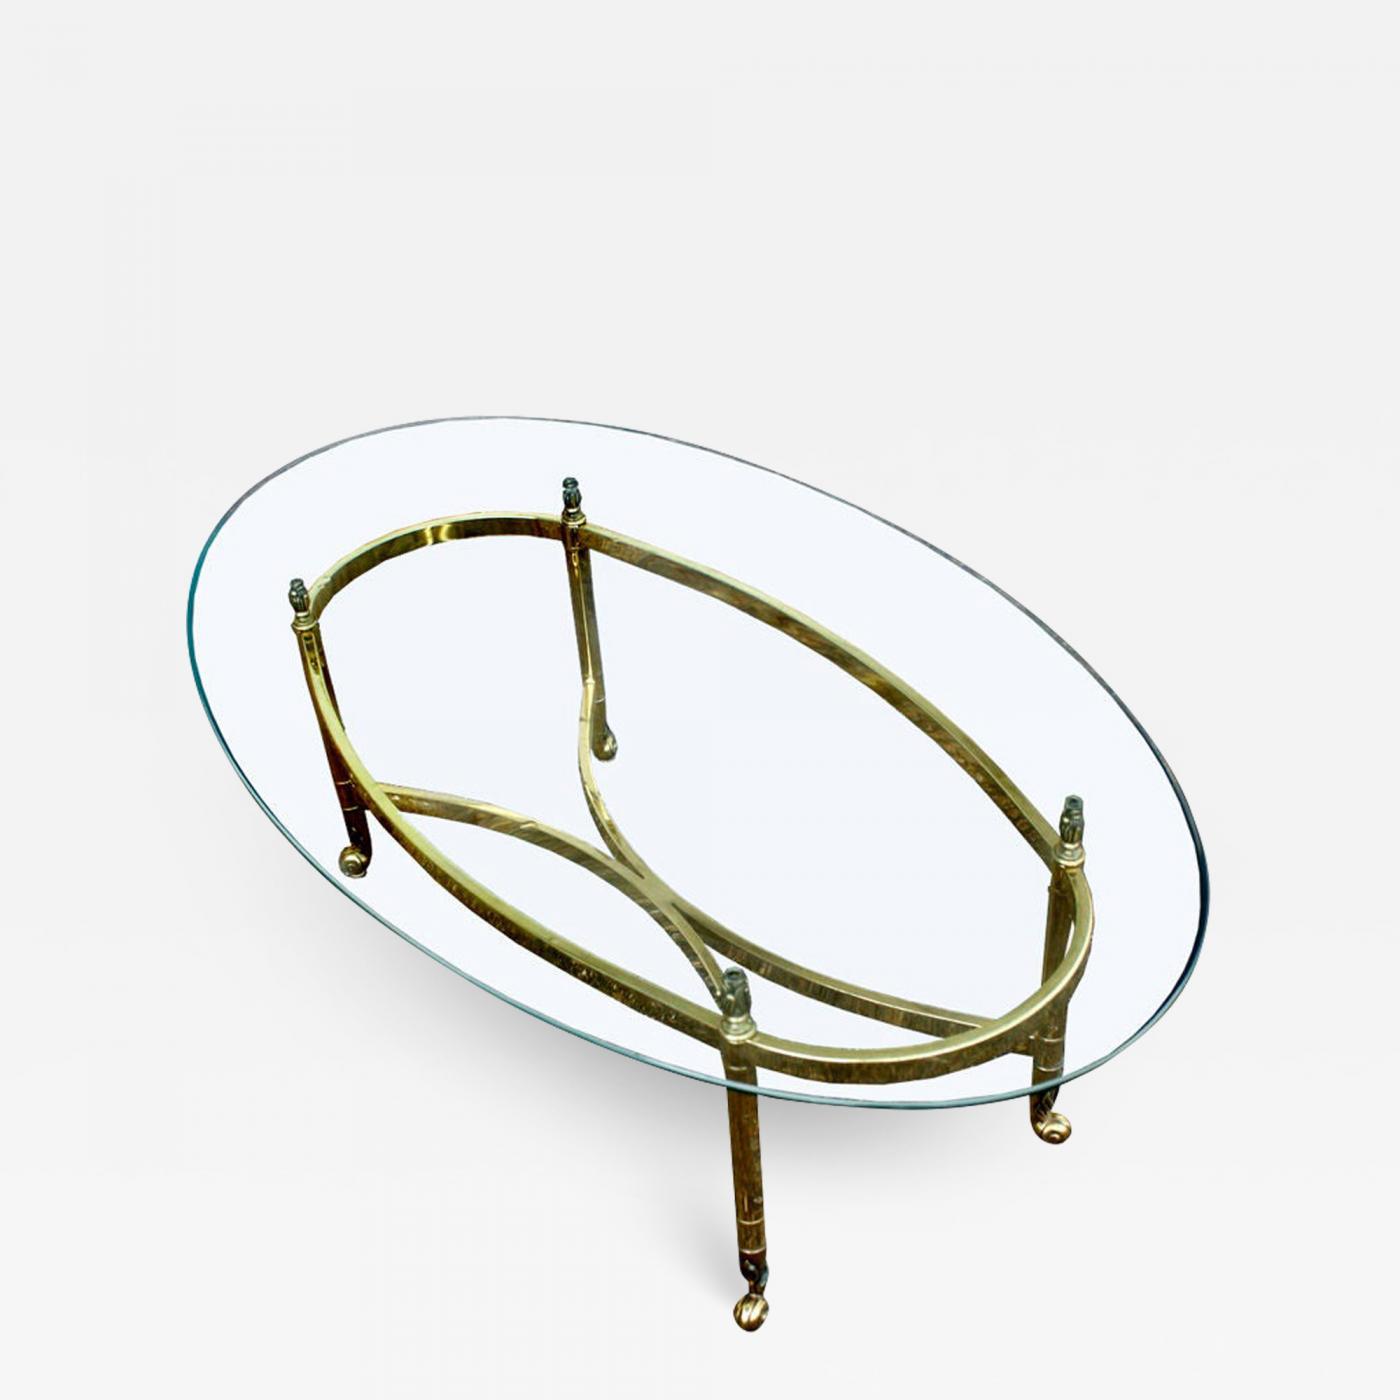 Sold at Auction: LA BARGE BRASS MODERNIST TALL STAND PEDESTAL TABLE. SQUARE  GLASS TOP. LABEL. FERN STAND.